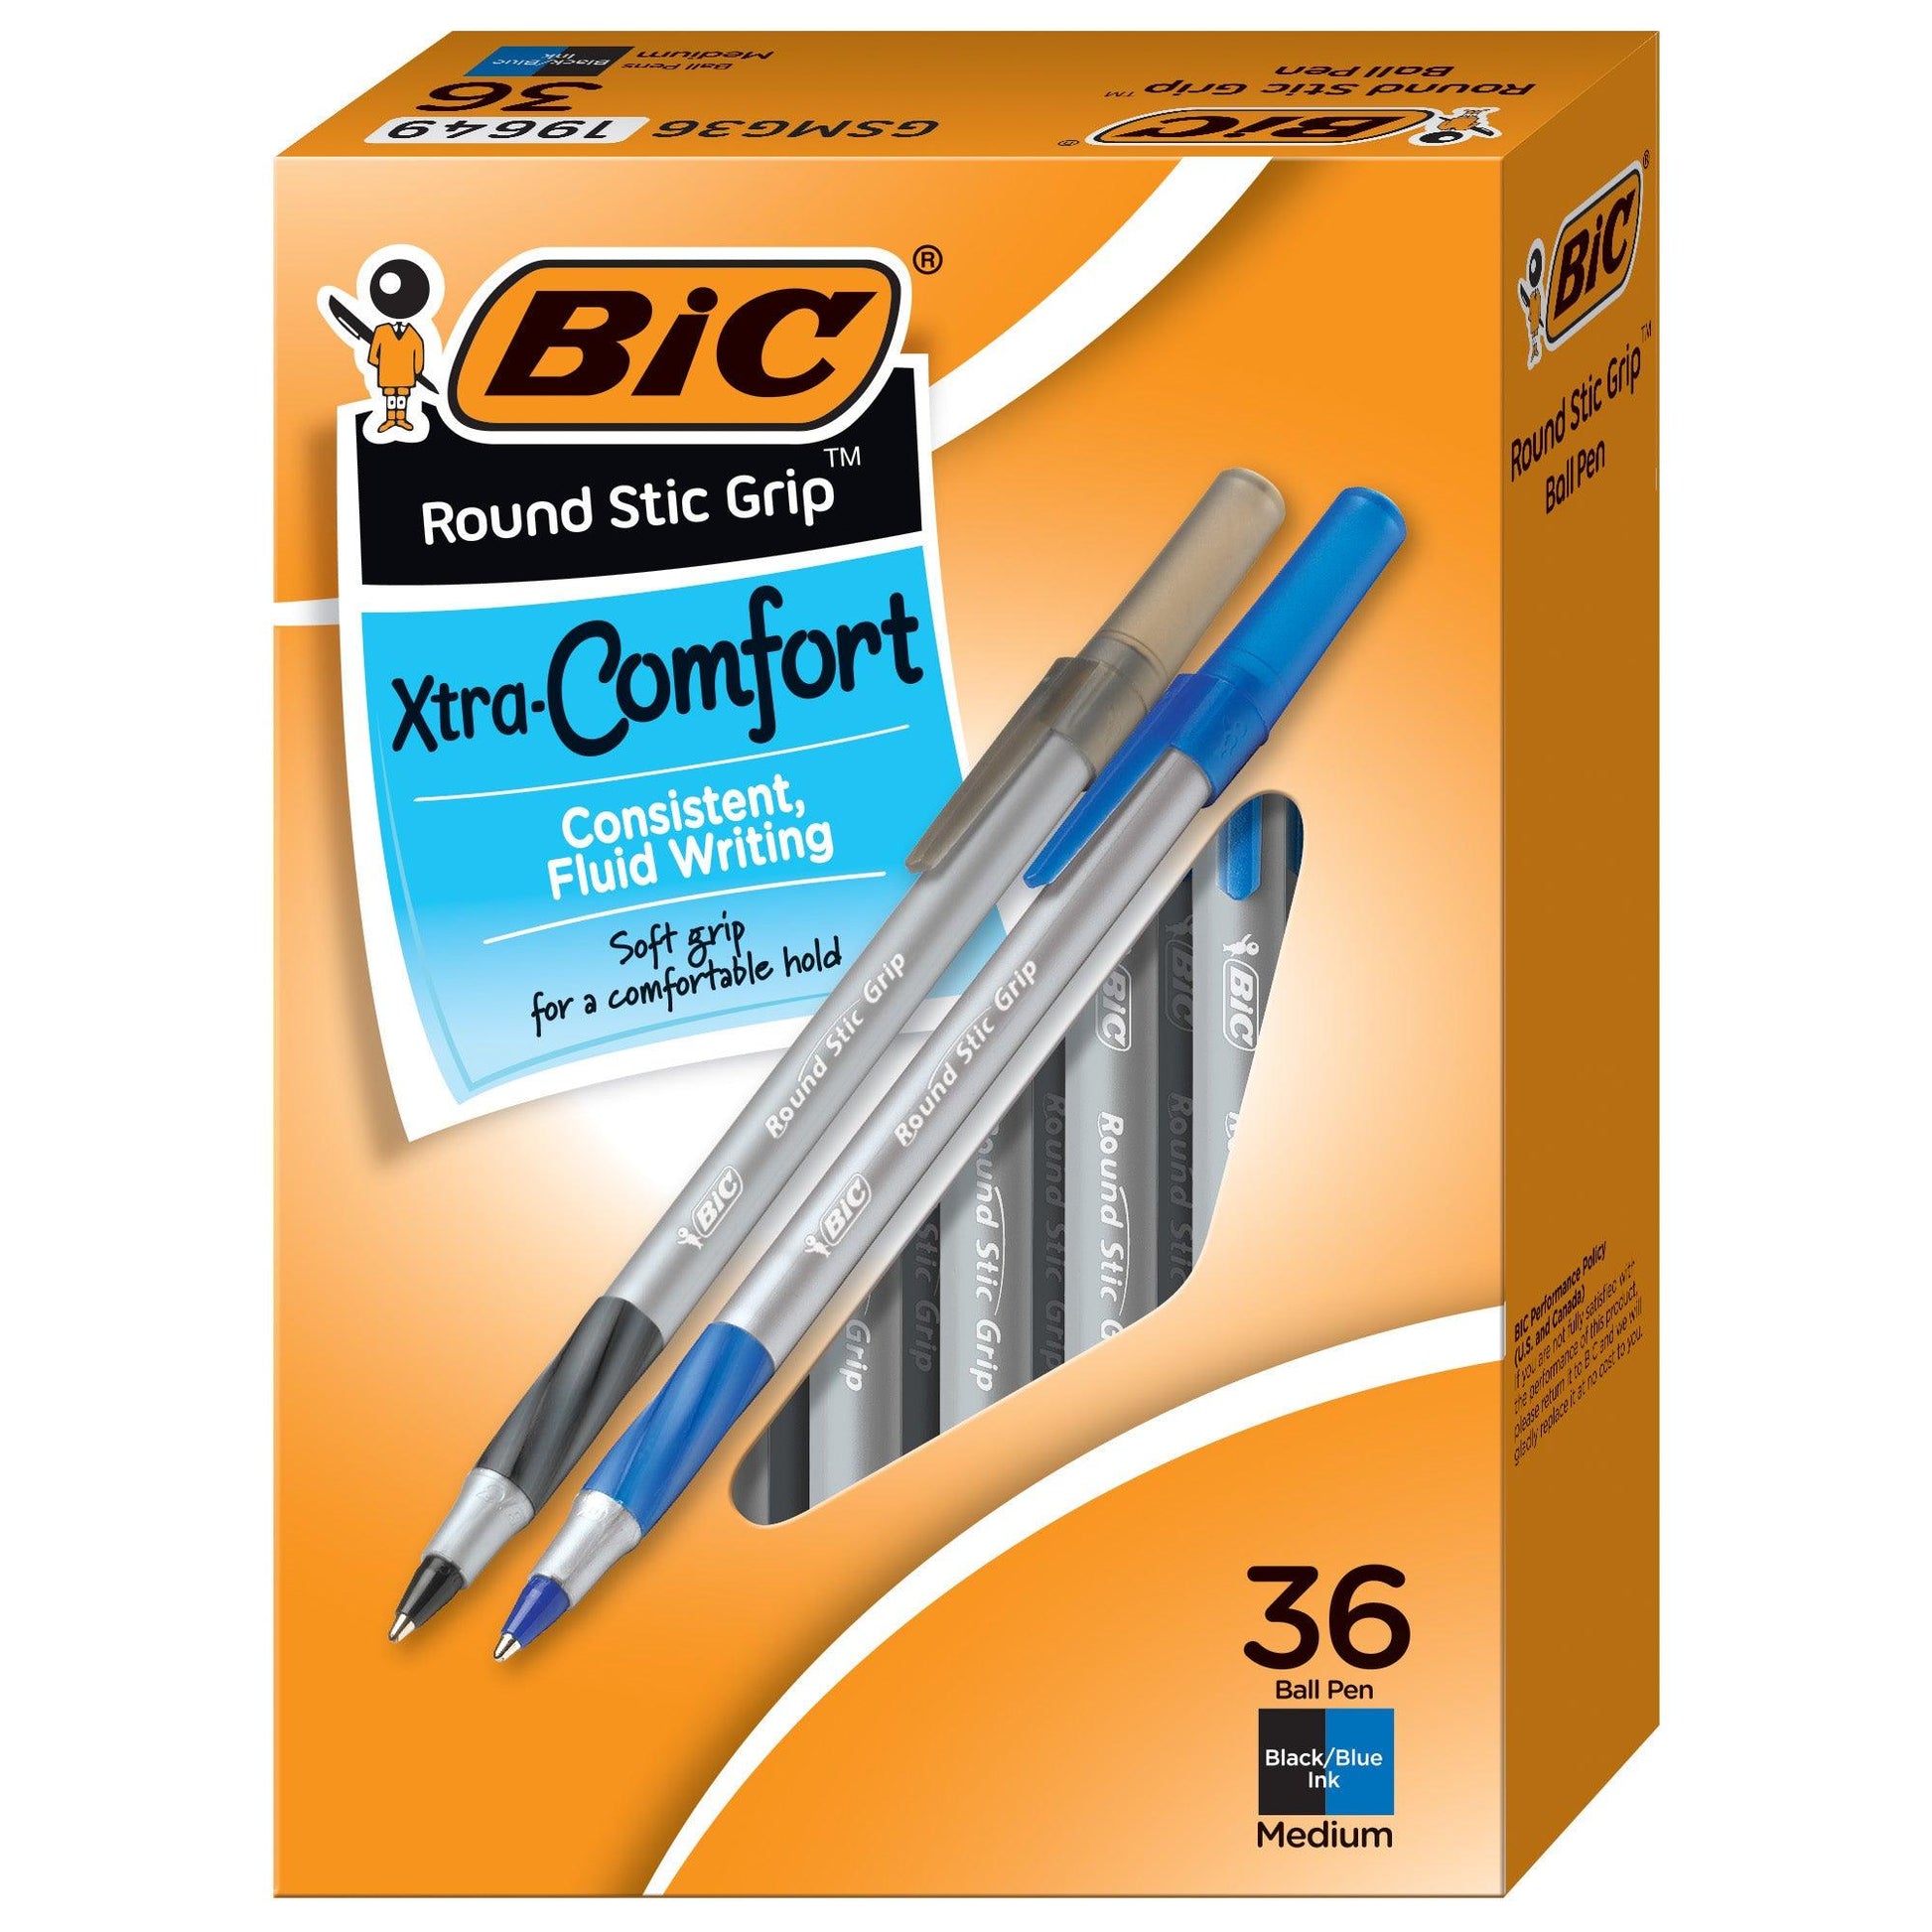 Round Stic Grip Xtra Comfort Ballpoint Pens, Medium Point (1.2mm), Assorted Colors, 36 Per Pack, 3 Packs - Loomini